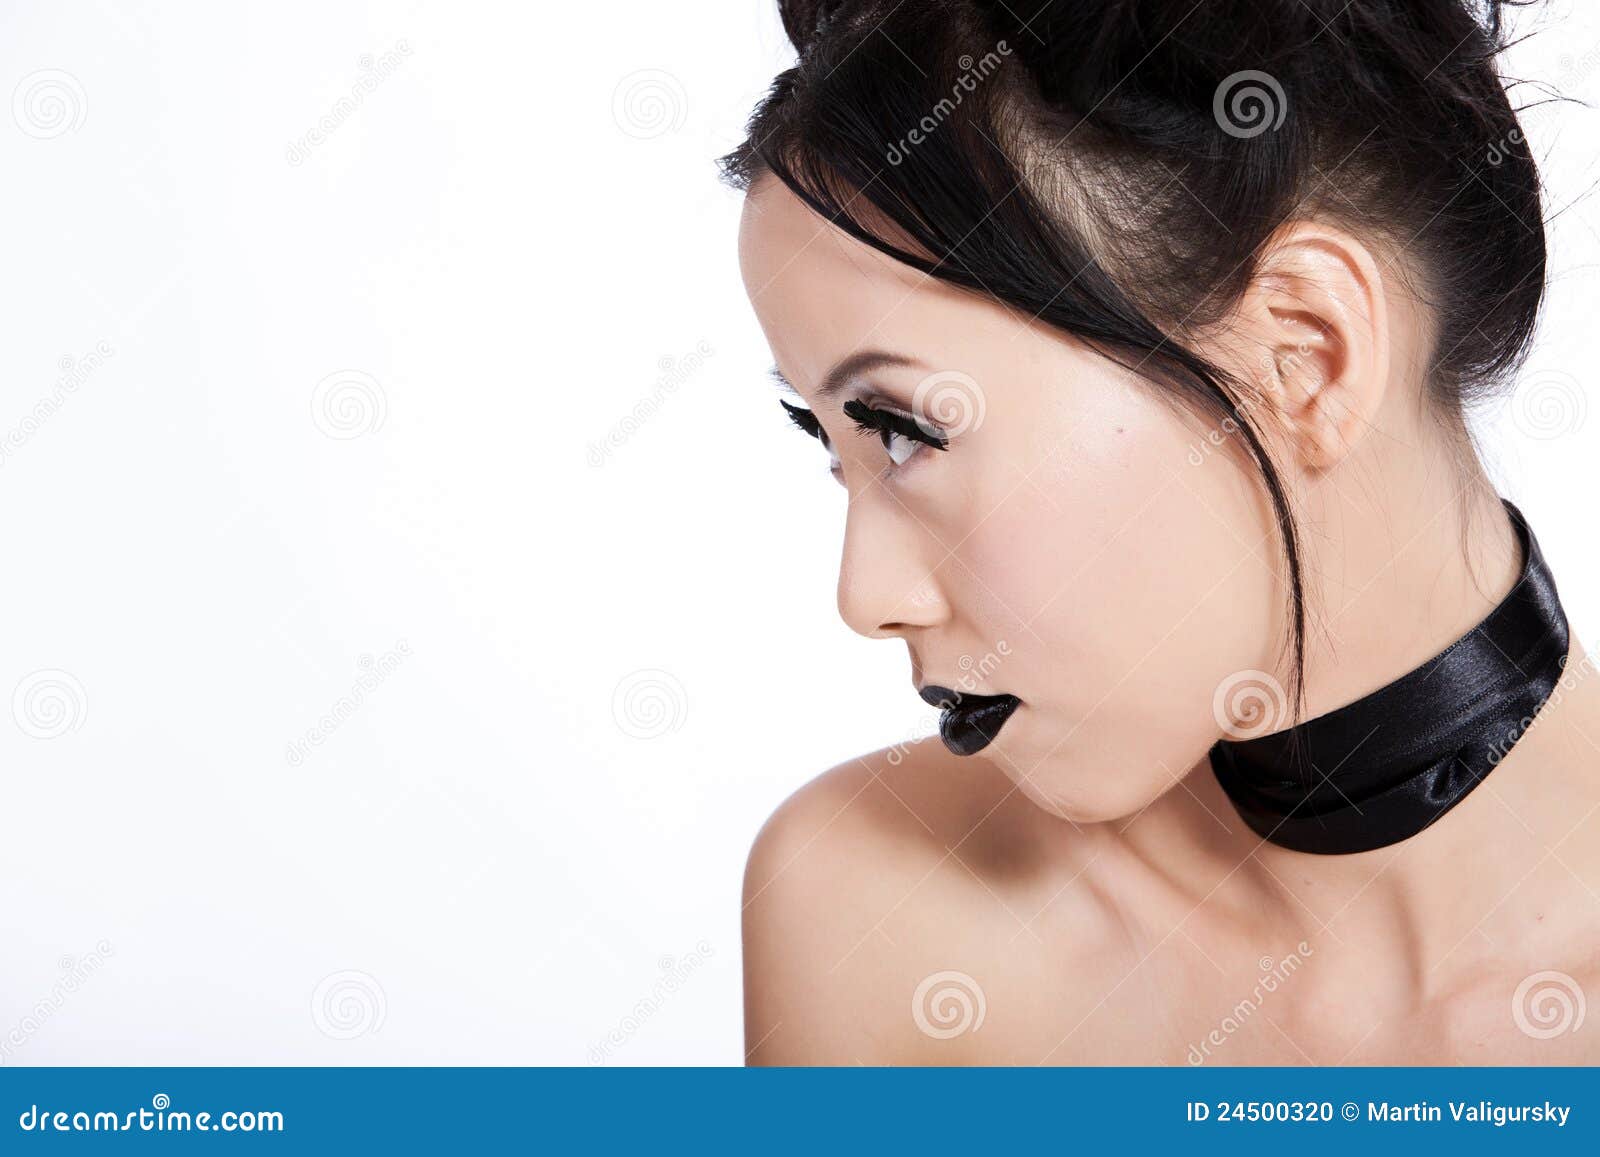 Profile Of Asian Female With Creative Black Makeup Stock 